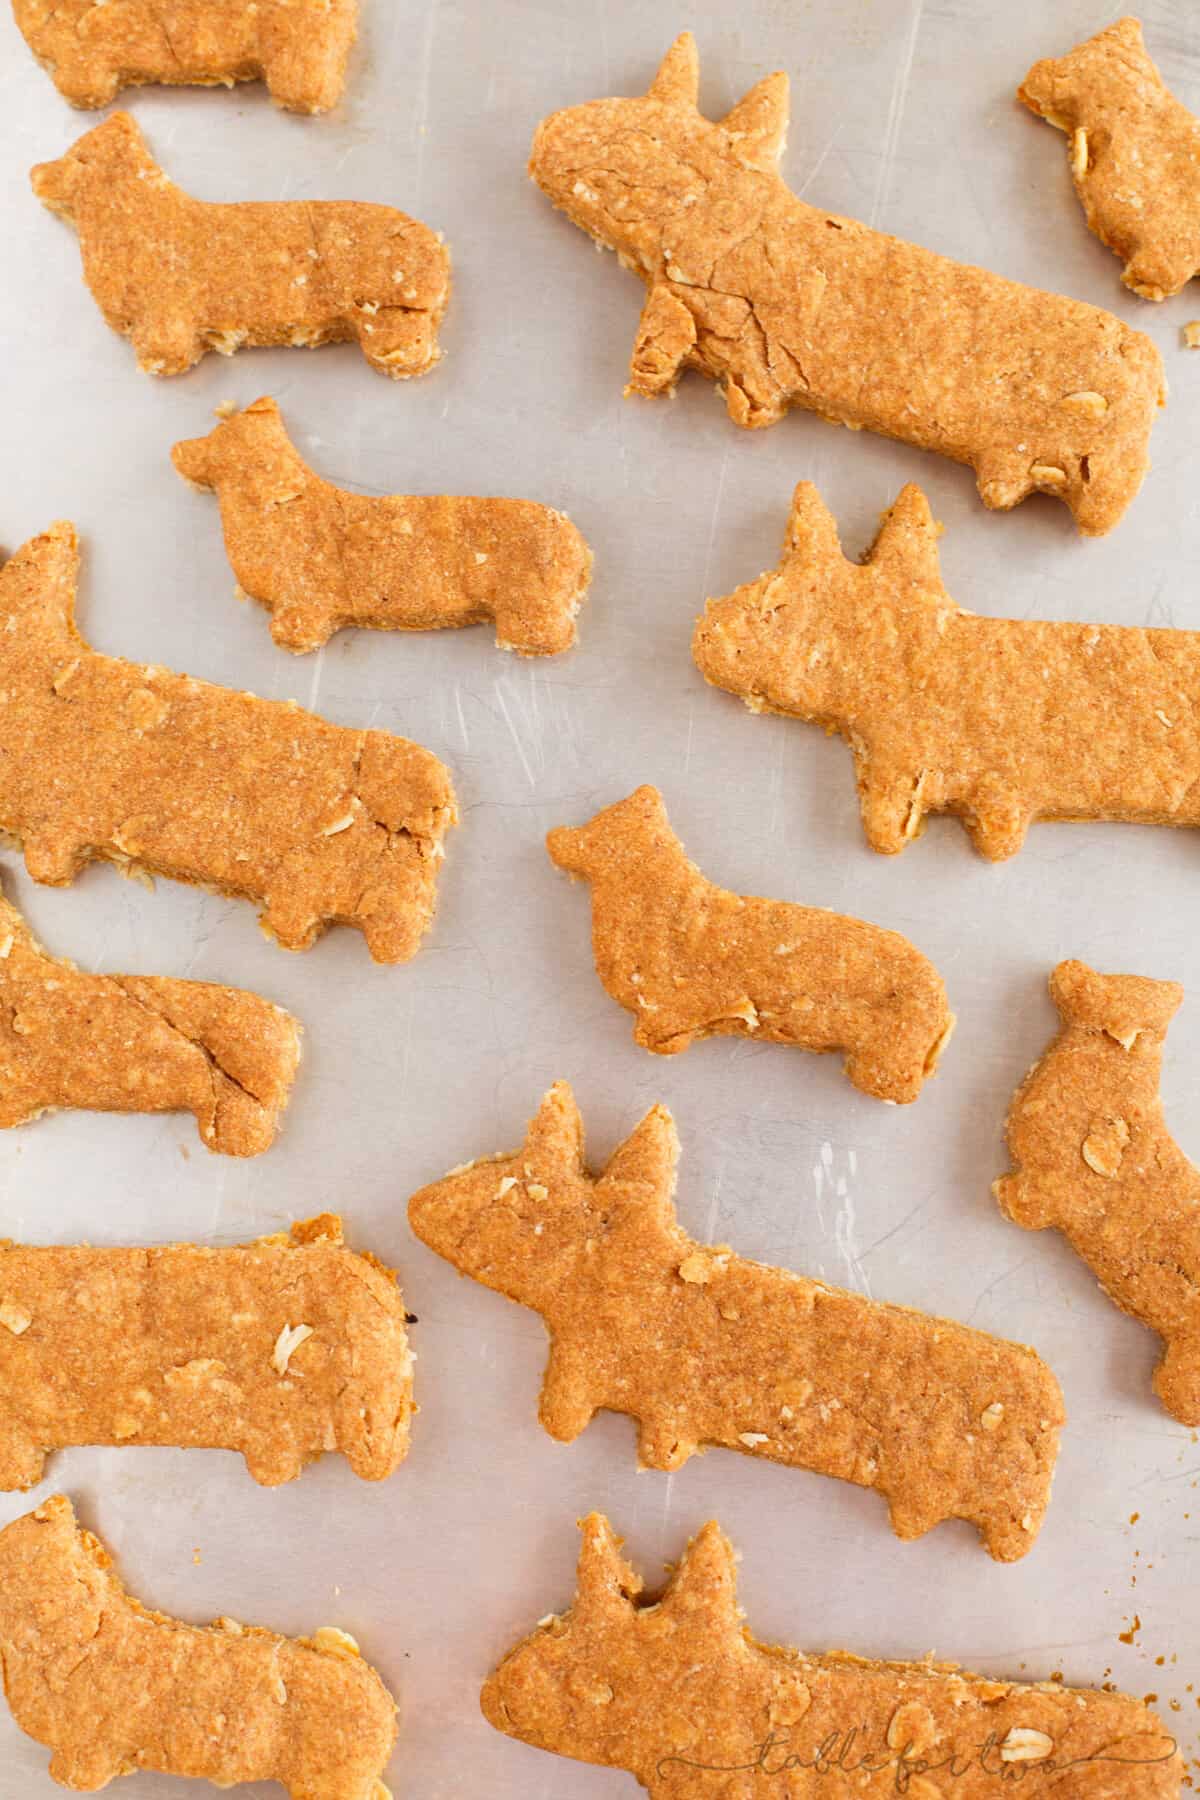 The cutest dog biscuit treats for your furry friend!!